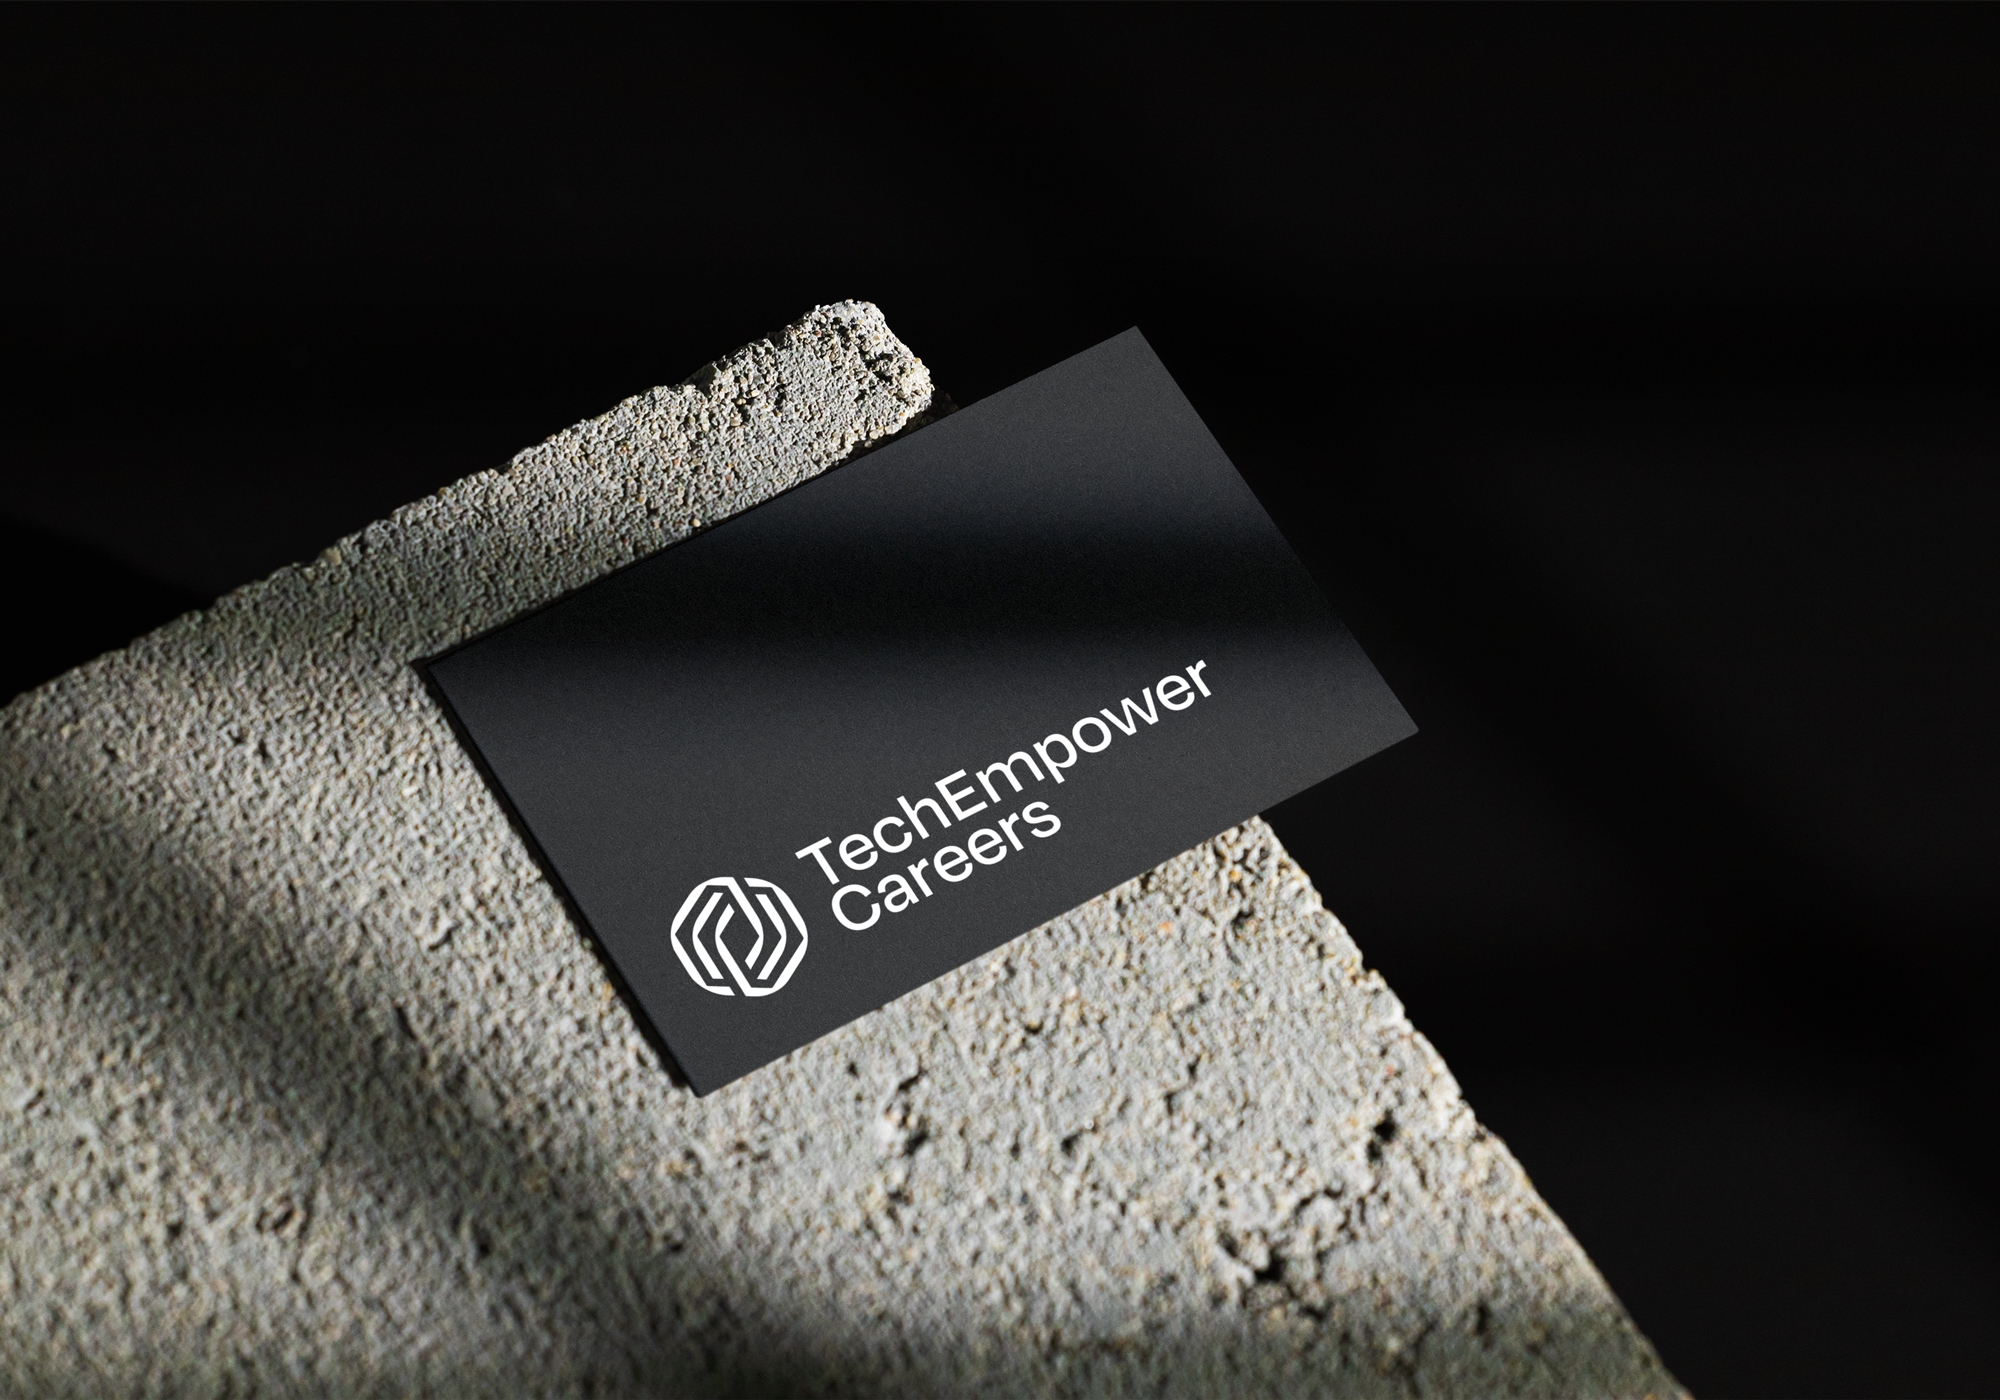 TechEmpower Careers mockup of business card on concrete